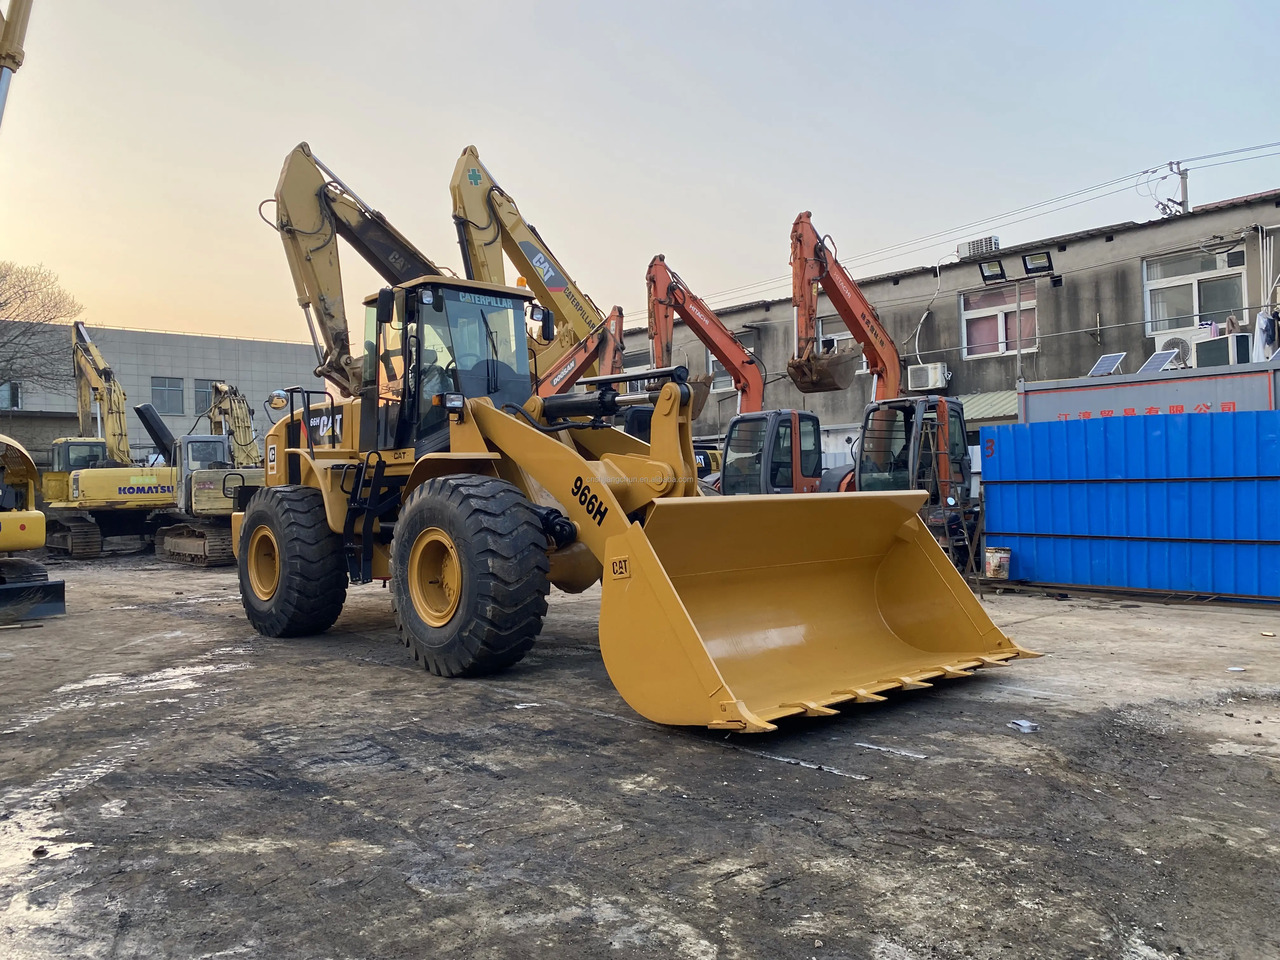 Wheel loader Secondhand Japanese Cat966H Used Wheel Loaders Cheap Price Wheel Loader 966H second-hand construction machinery